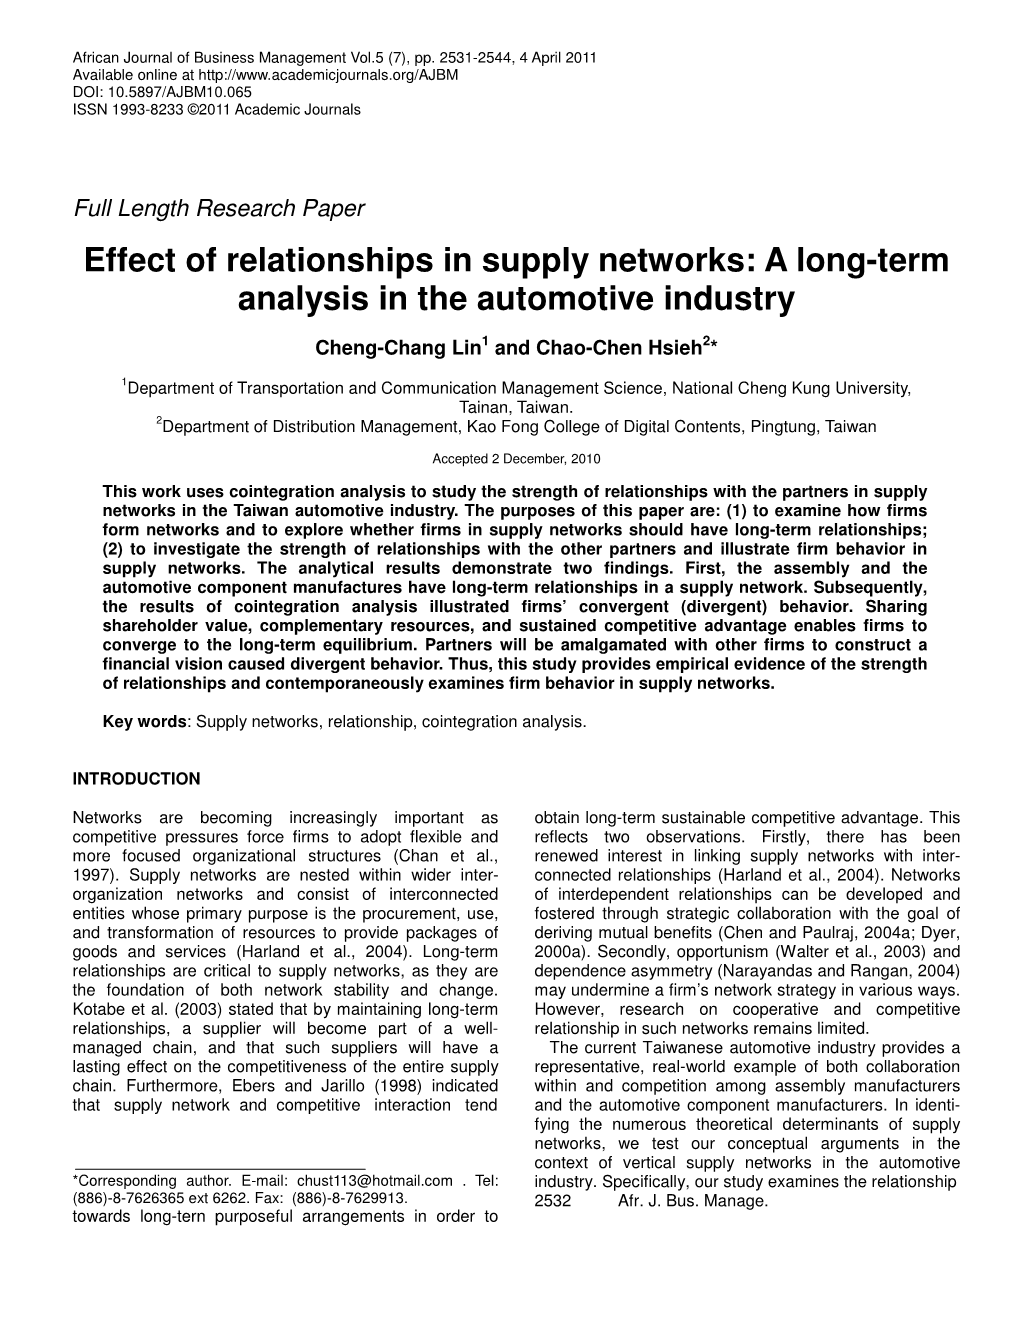 Effect of Relationships in Supply Networks: a Long-Term Analysis in the Automotive Industry